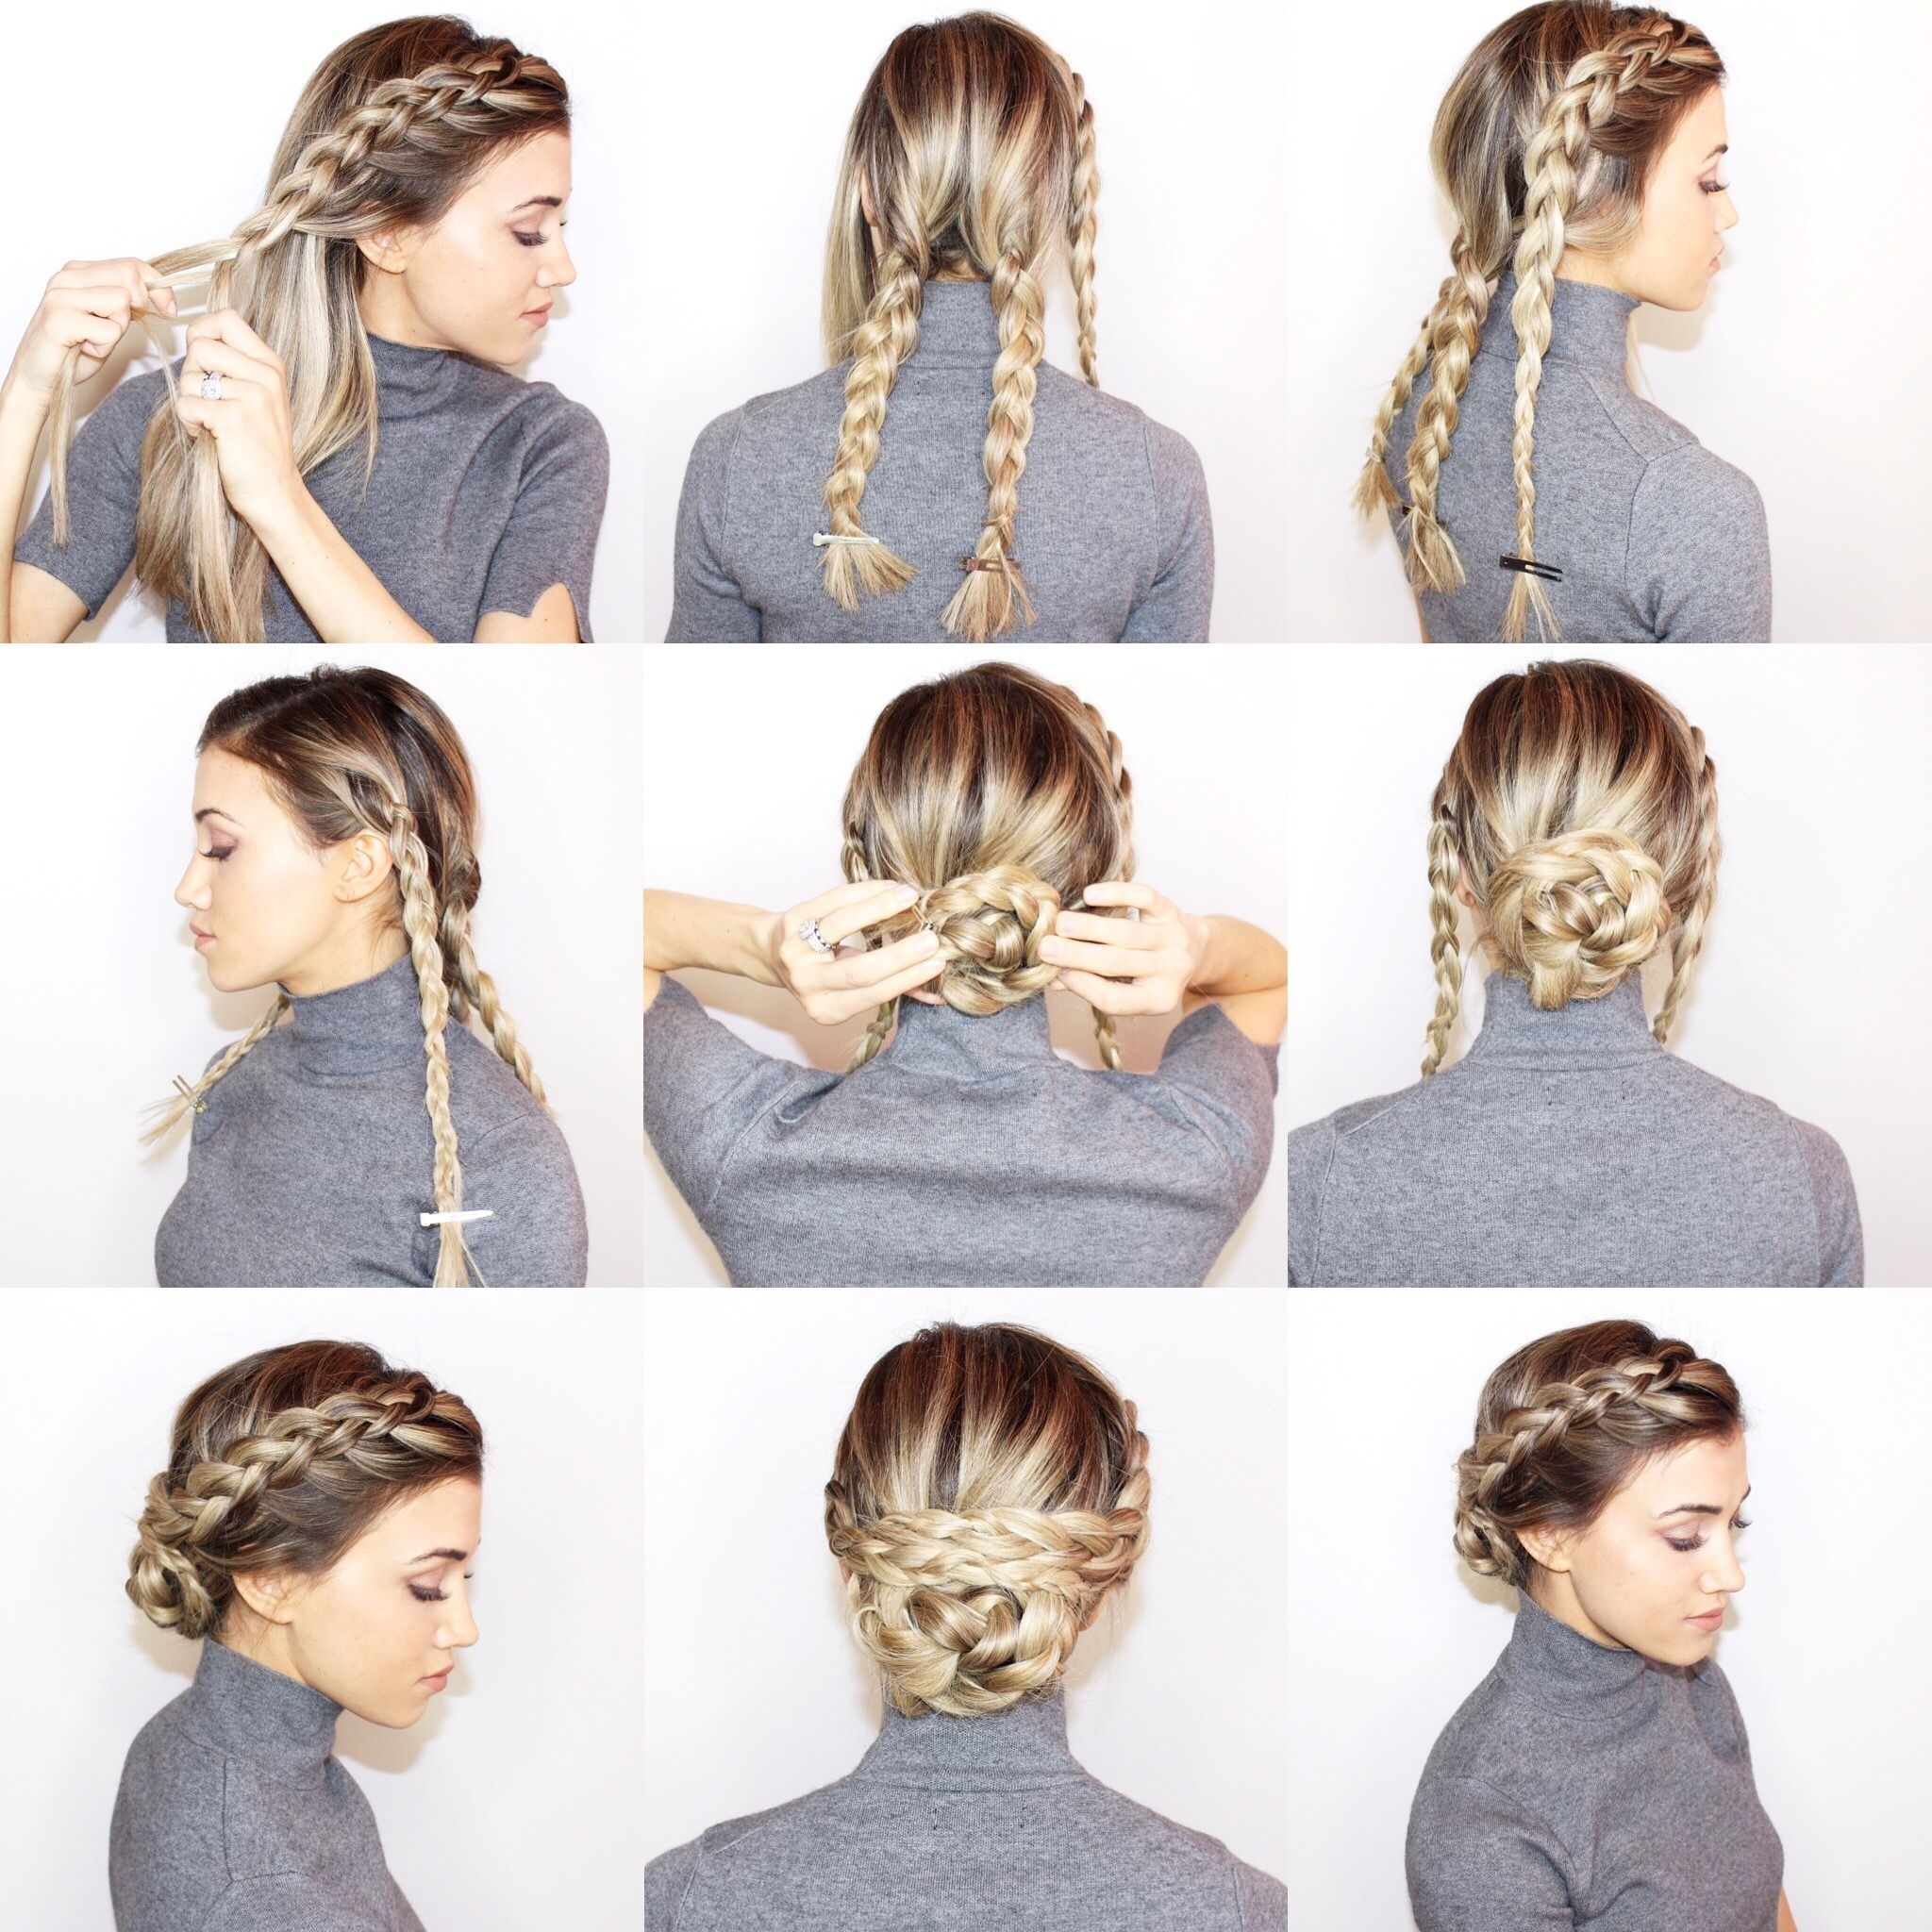 Oscar Worthy Hairstyles: Get The Look | Braided Bun within Indian Bun Hairstyles For Long Hair Step By Step